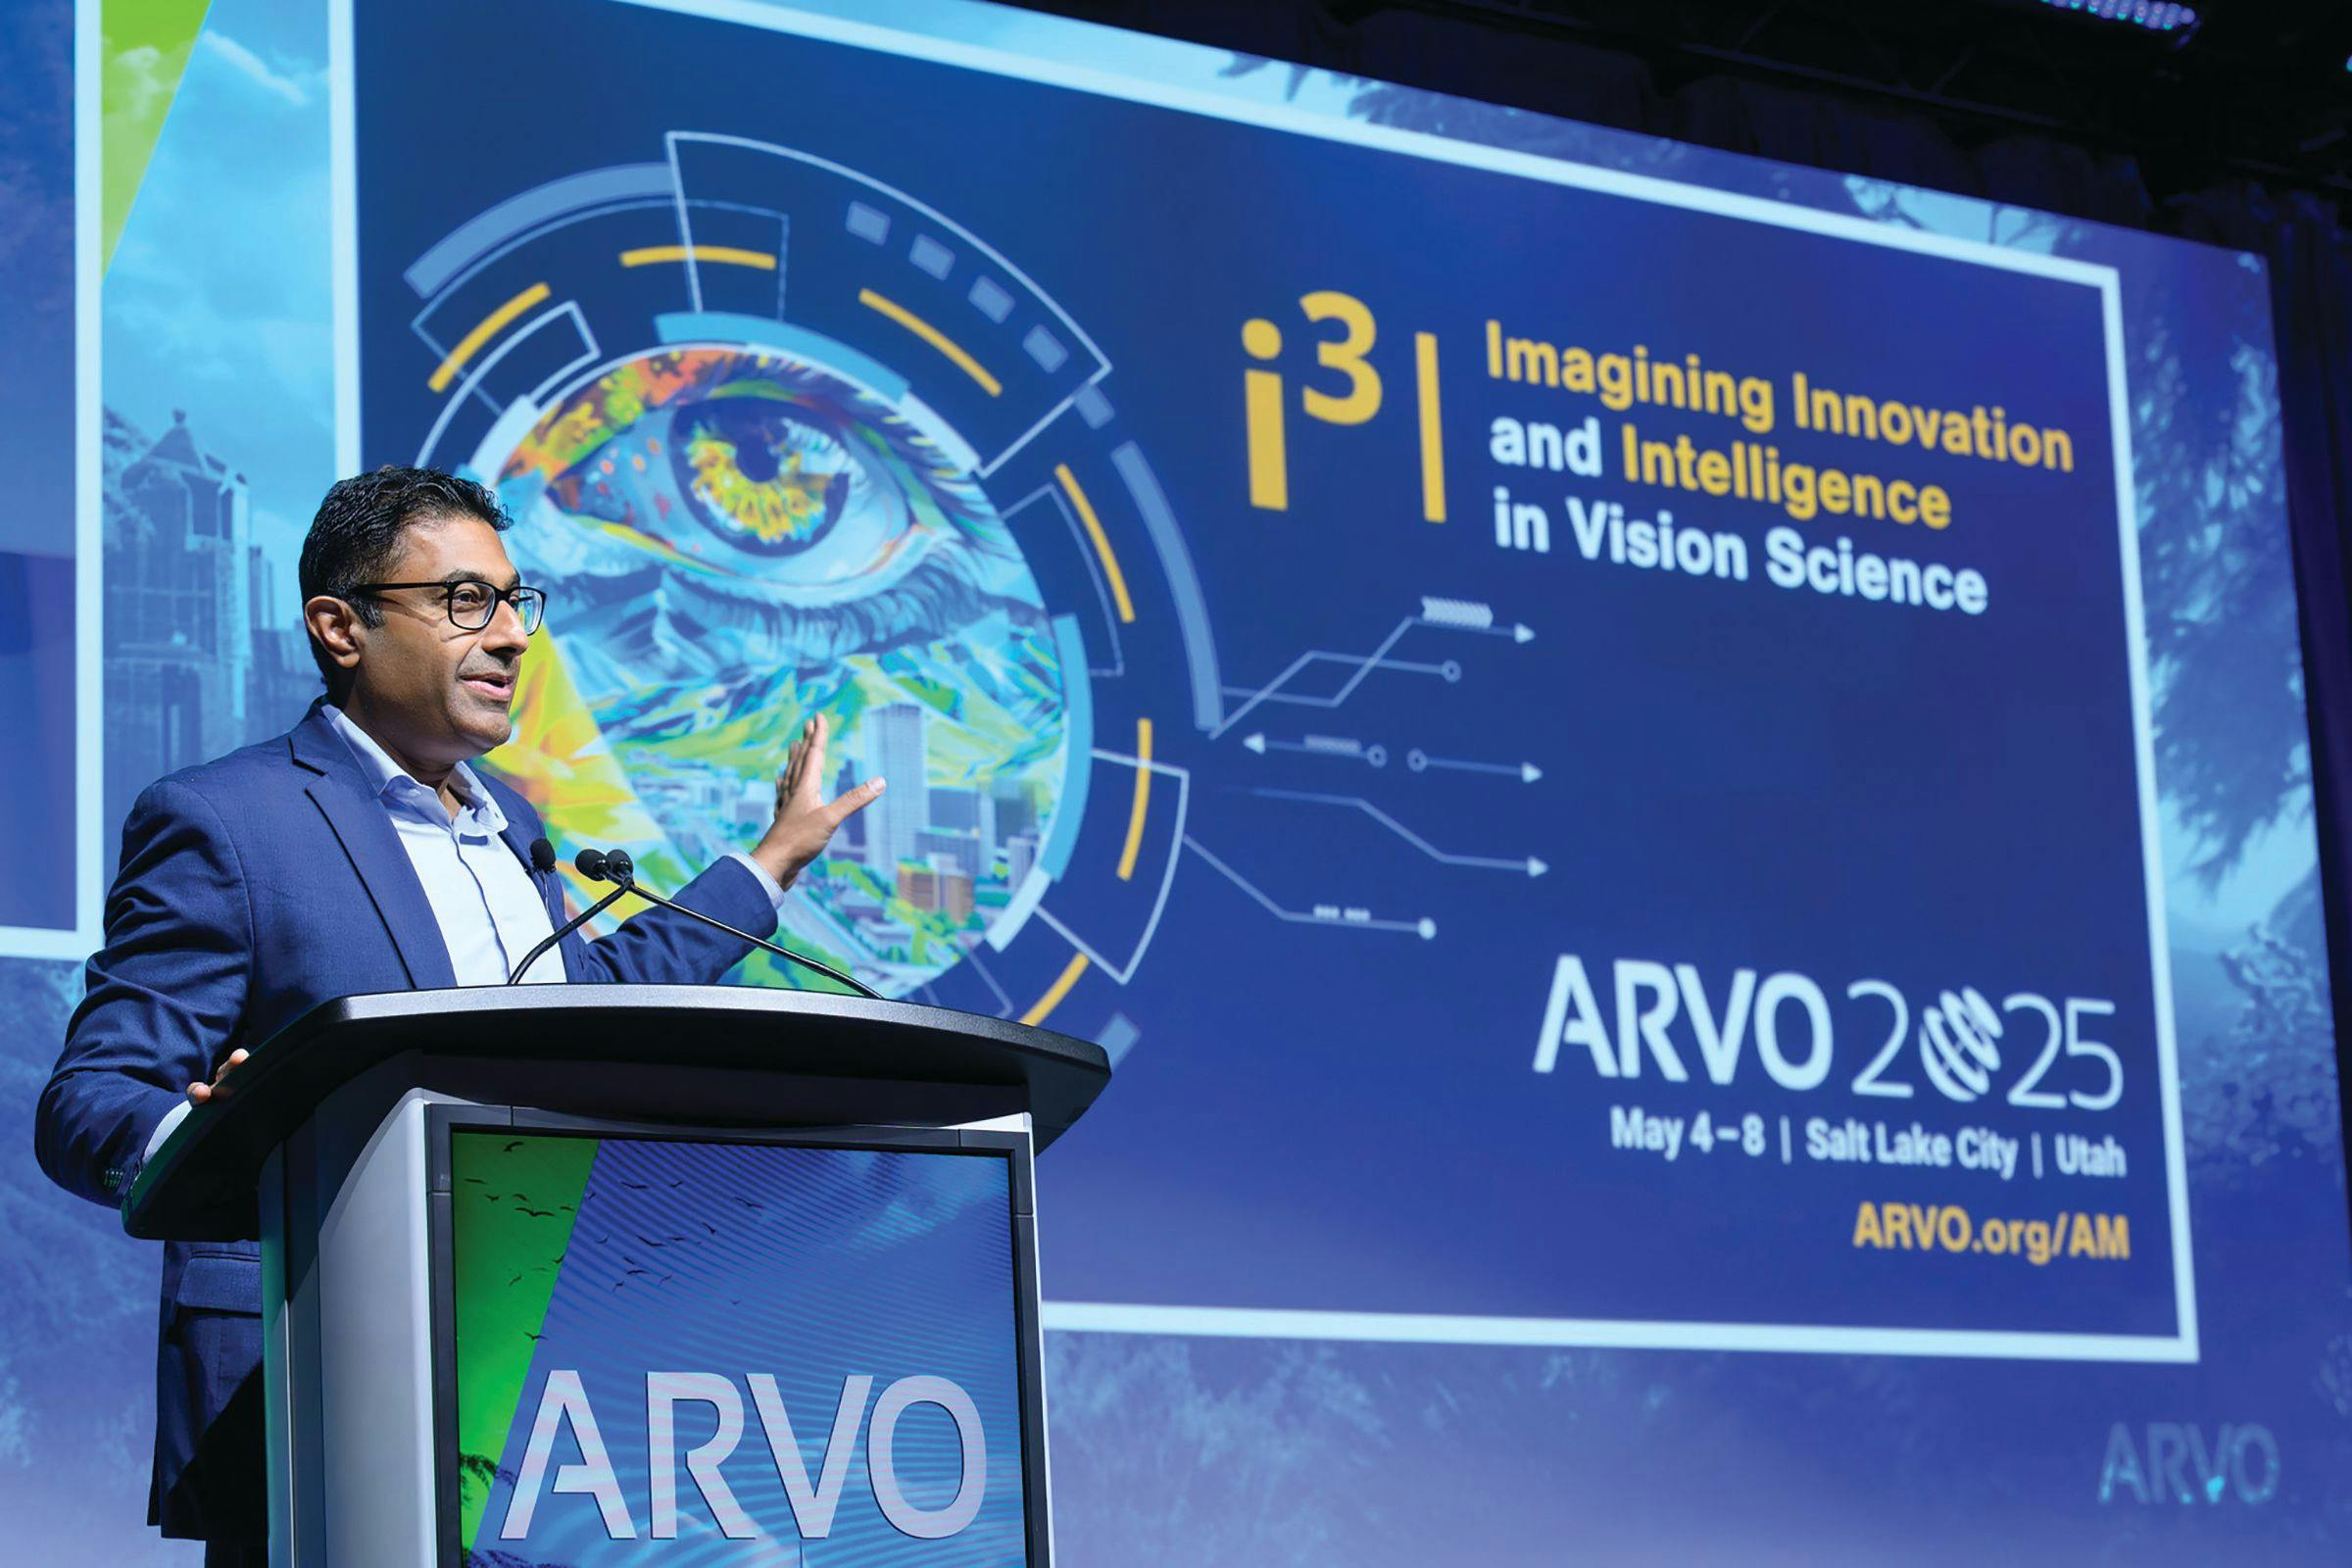 ARVO President Srinivas Sadda, MD, FARVO, leads a preview of the 2025 meeting. Image provided courtesy of the Association for Research in Vision and Ophthalmology (ARVO).